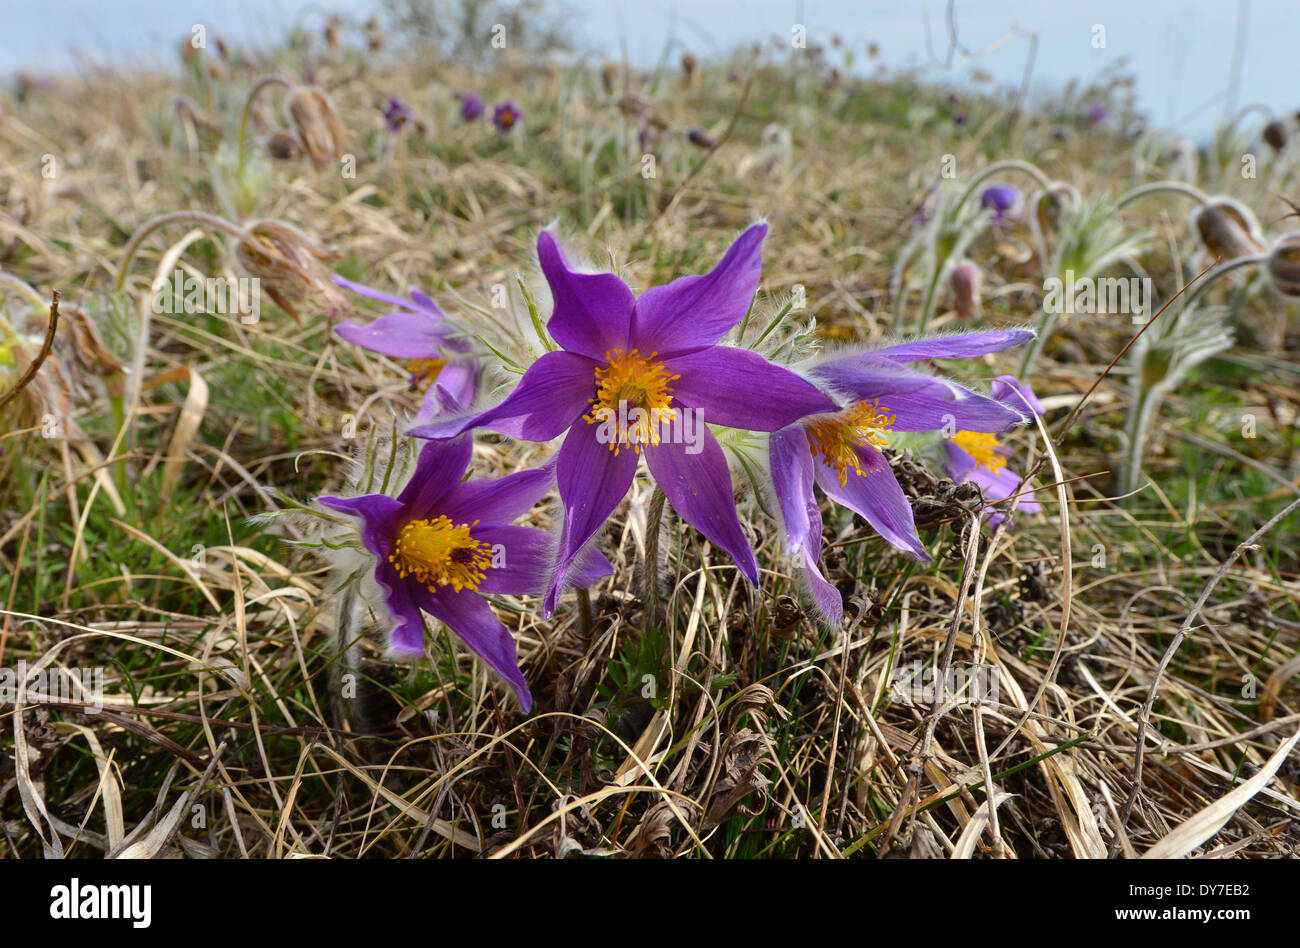 (FILE) The file photo dated 28 March 2014 shows the purple blossoms of the common pasque flower (Pulsatilla vulgaris) on the former death strip at today's border between the German states of Thuringia and Bavaria near Milz, Germany. The former GDR border area now is a 1,400 km long 'Green Ribbon' that reaches from the Baltic Sea to the Voigtland region with more than 100 different types of biotopes. Photo: Martin Schutt/dpa Stock Photo